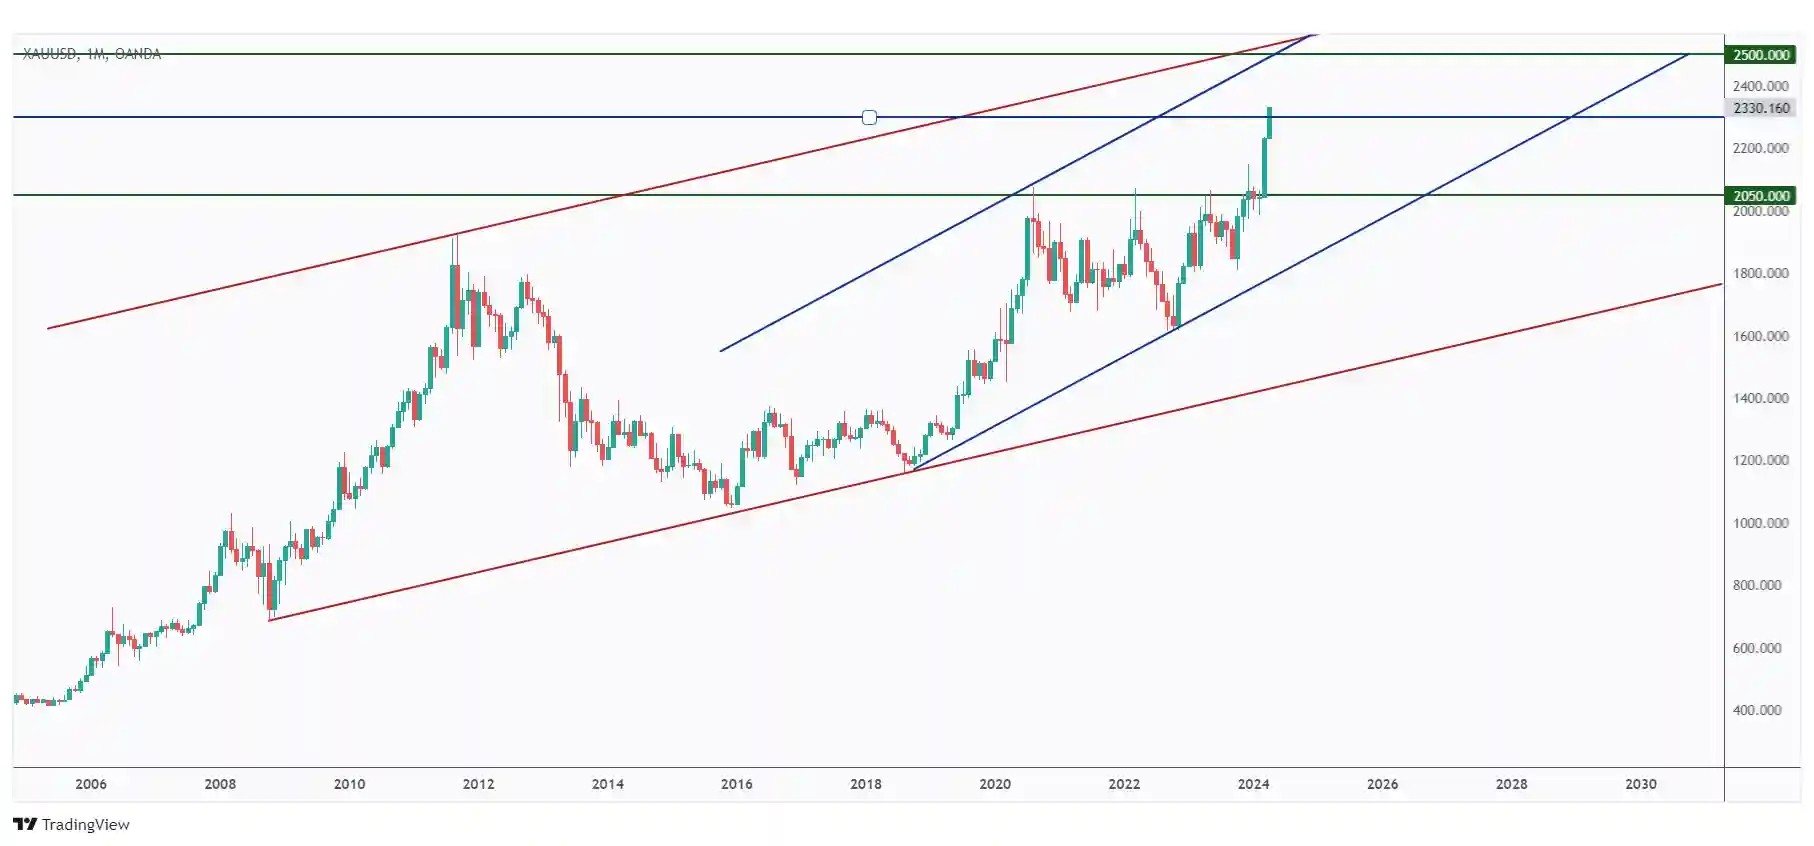 GOLD MONTHLY chart overall bullish and heading towards $2500.